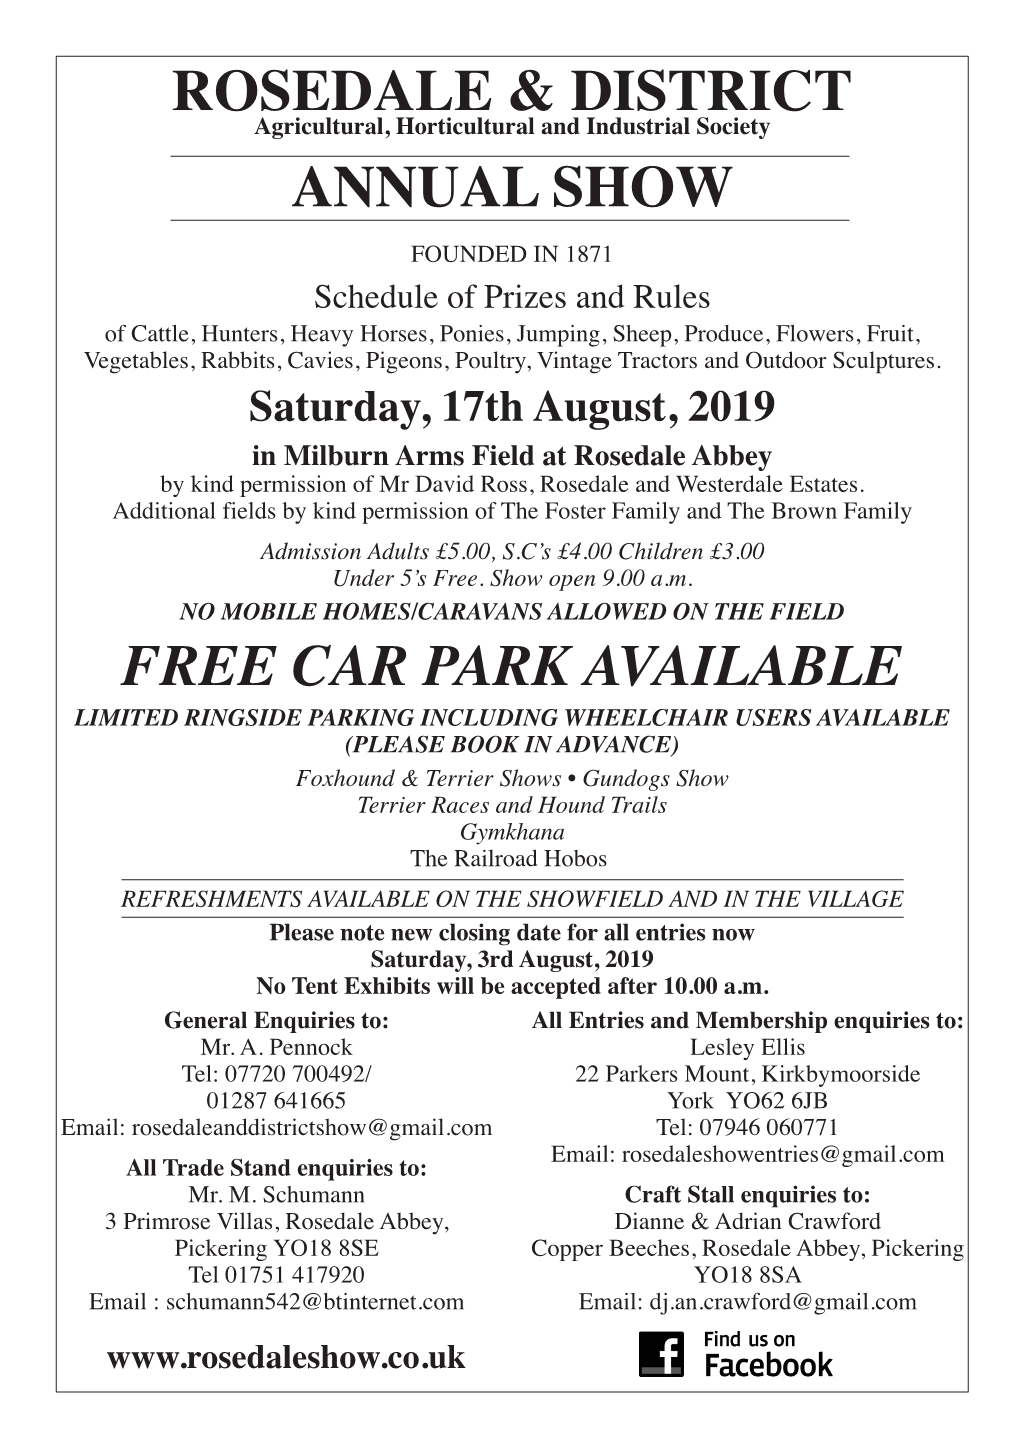 Rosedale & District Annual Show Free Car Park Available